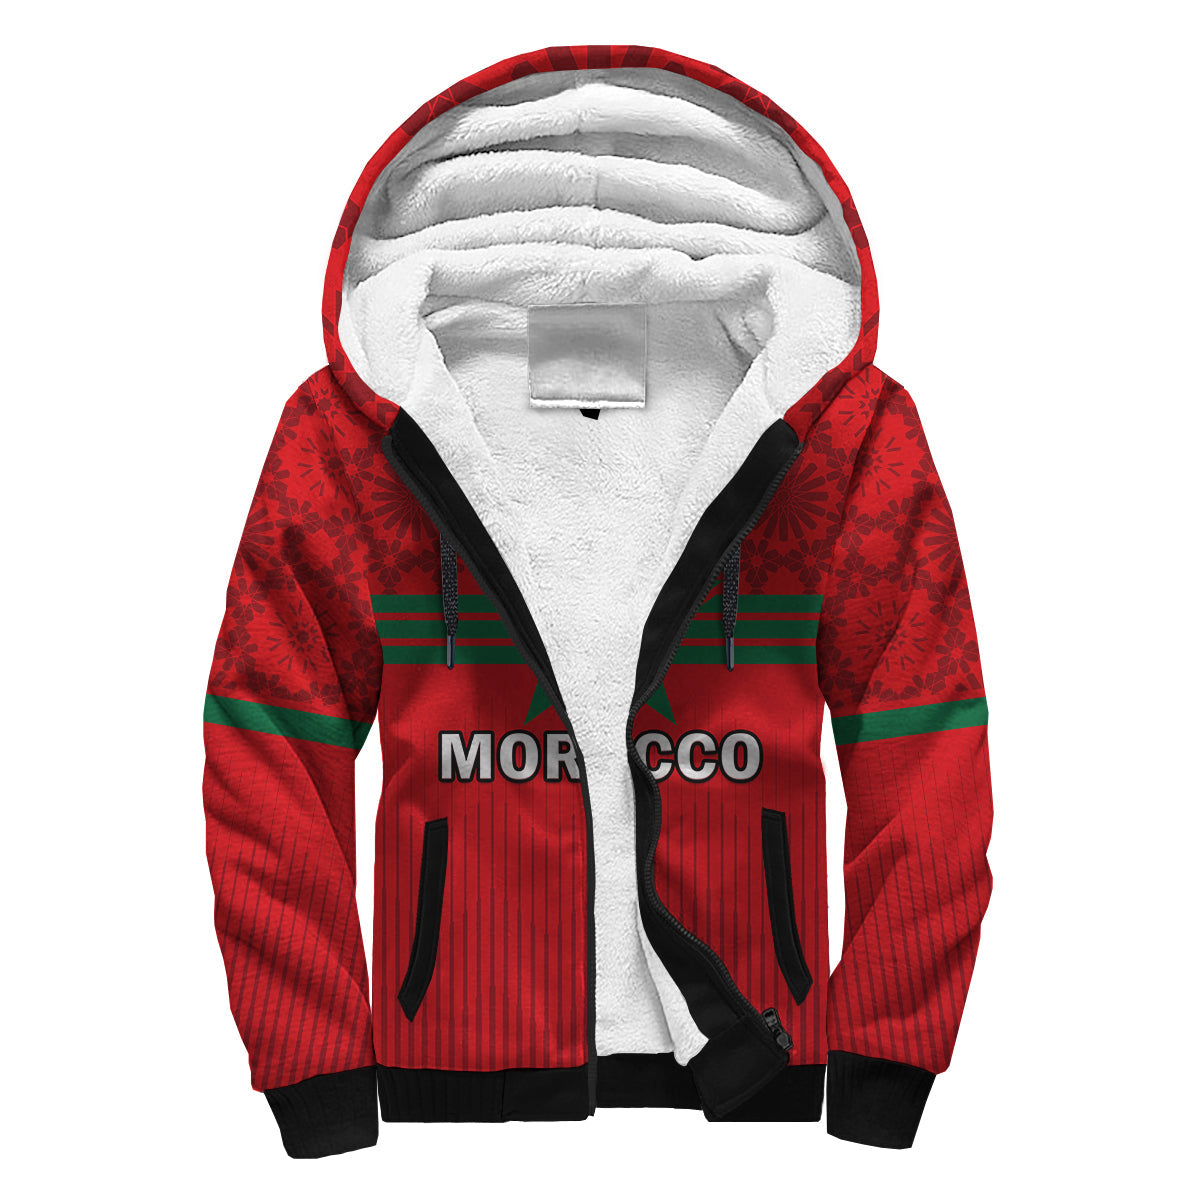 morocco-football-sherpa-hoodie-world-cup-2022-red-moroccan-pattern